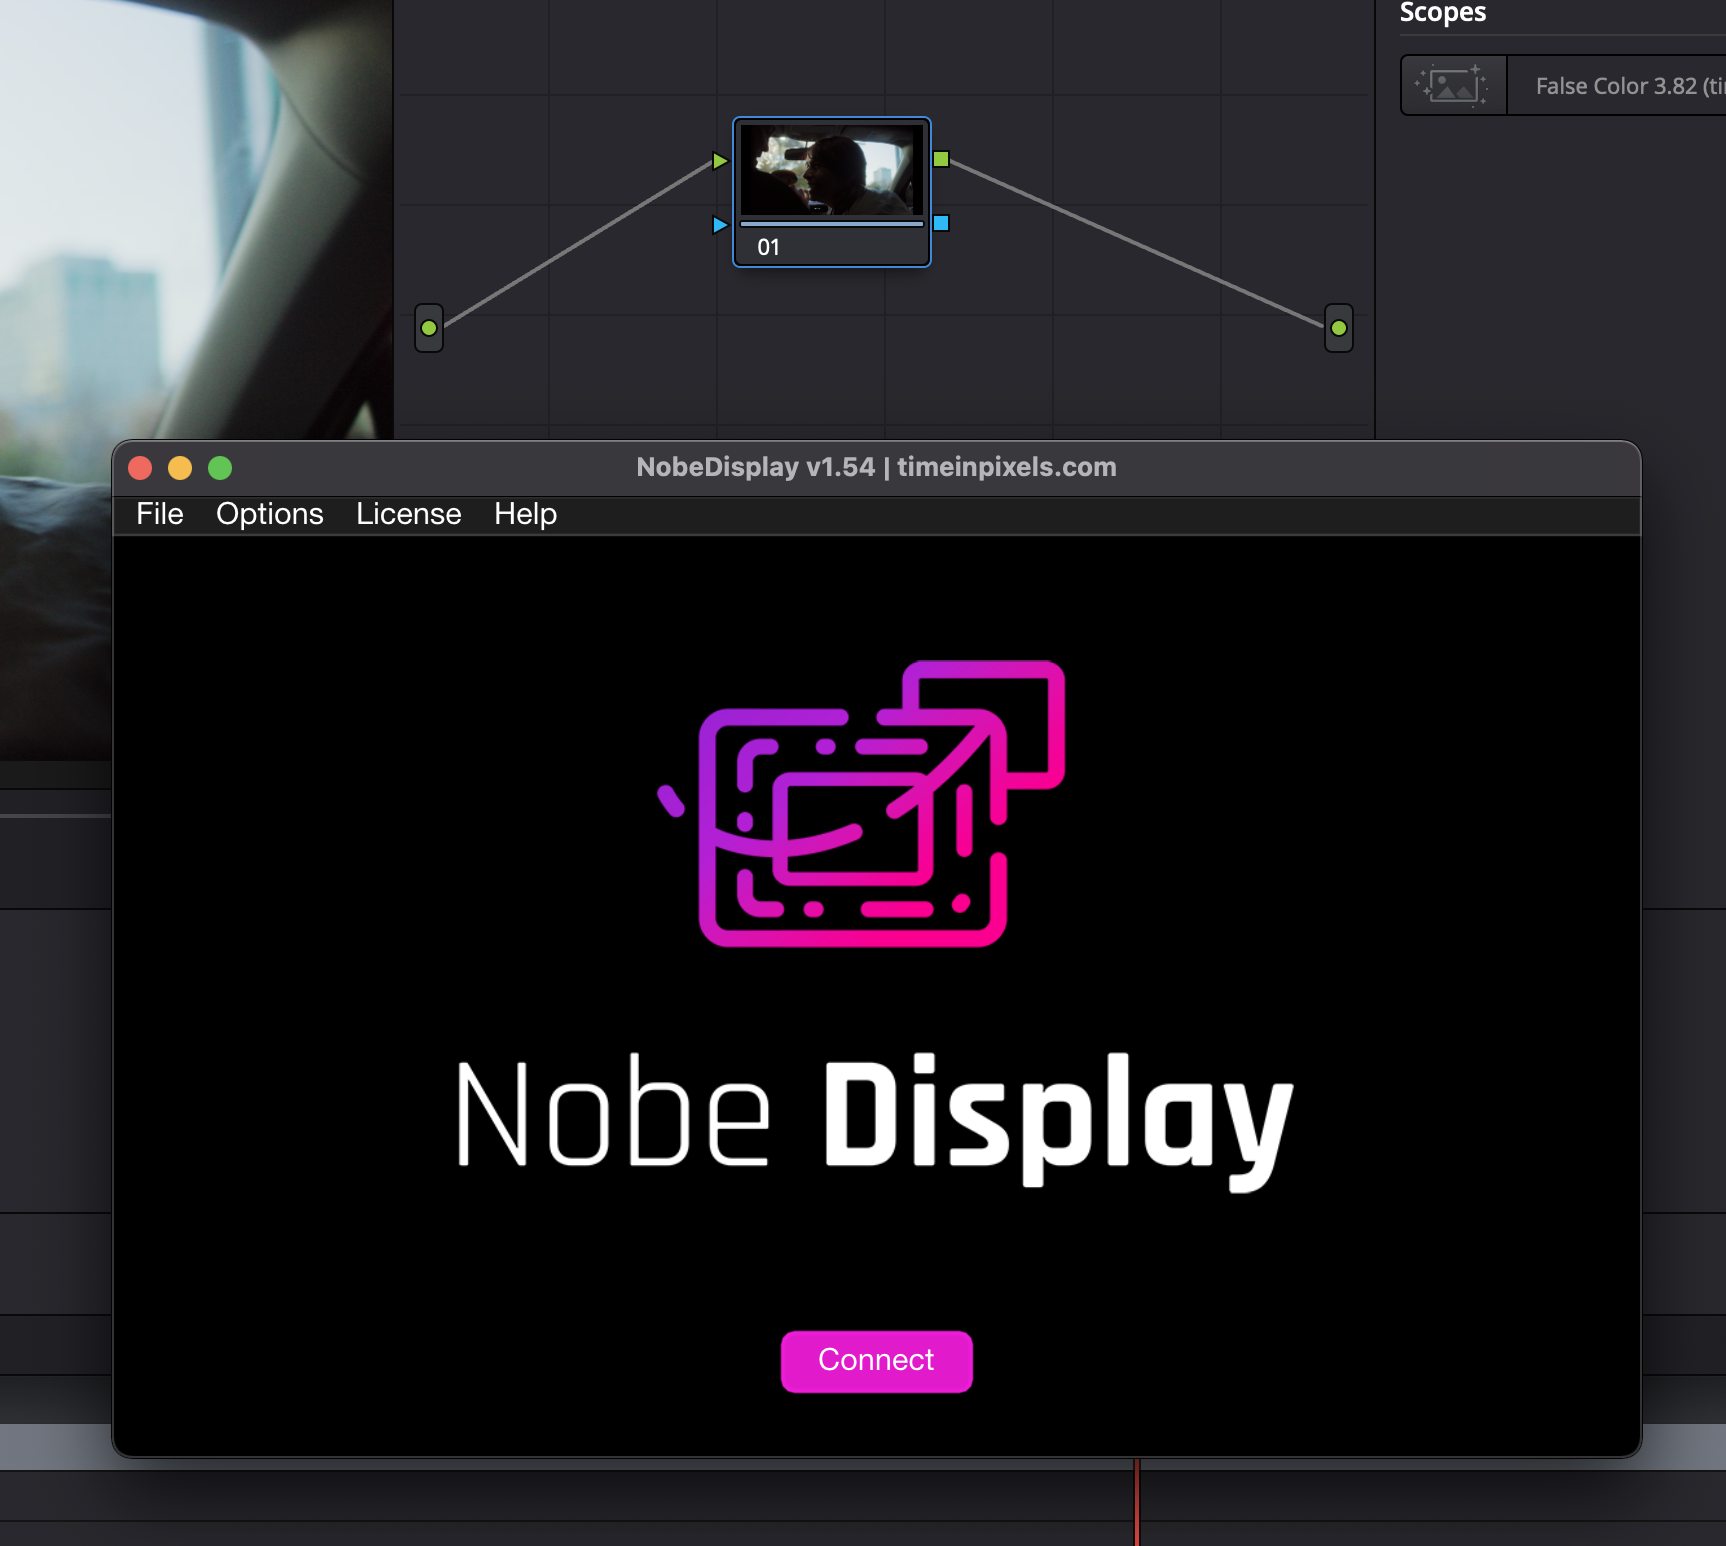 Nobe Display Now With Apple M1 And Ndi Support Remote Color Grading Made Easy Cined